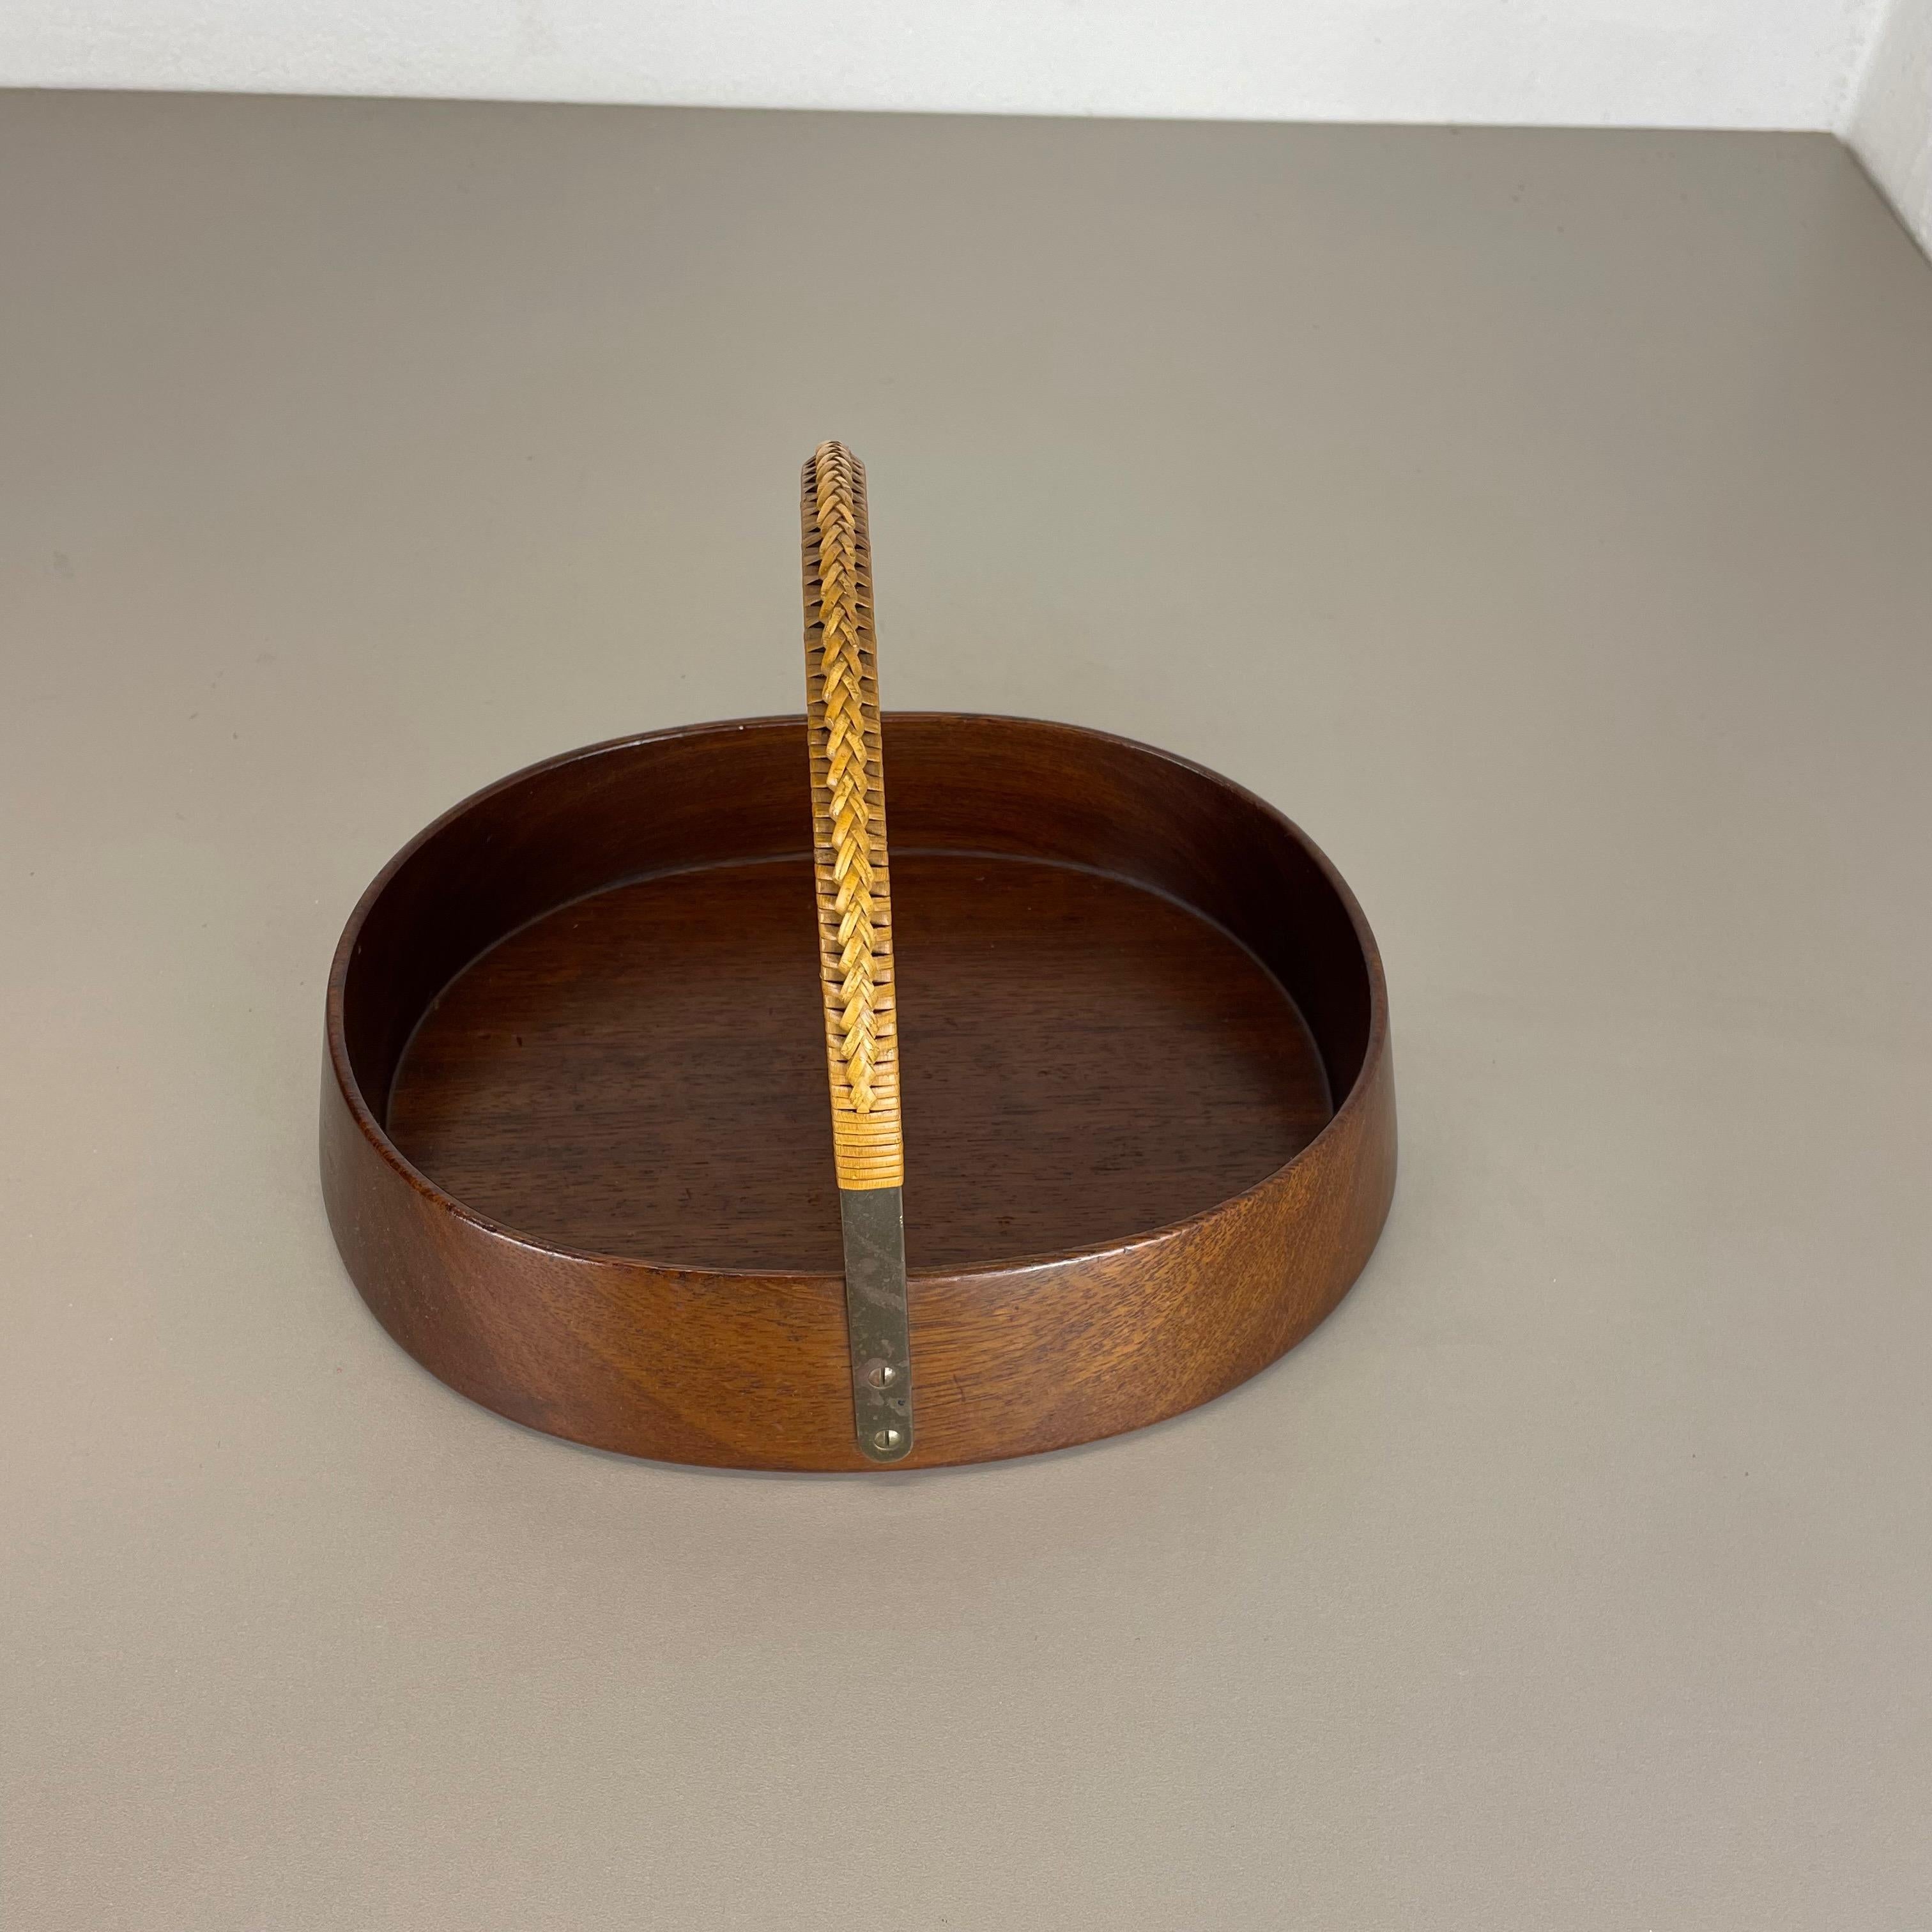 20th Century Large Teak Bowl with Brass and Rattan Handle by Carl Auböck, Austria, 1950s